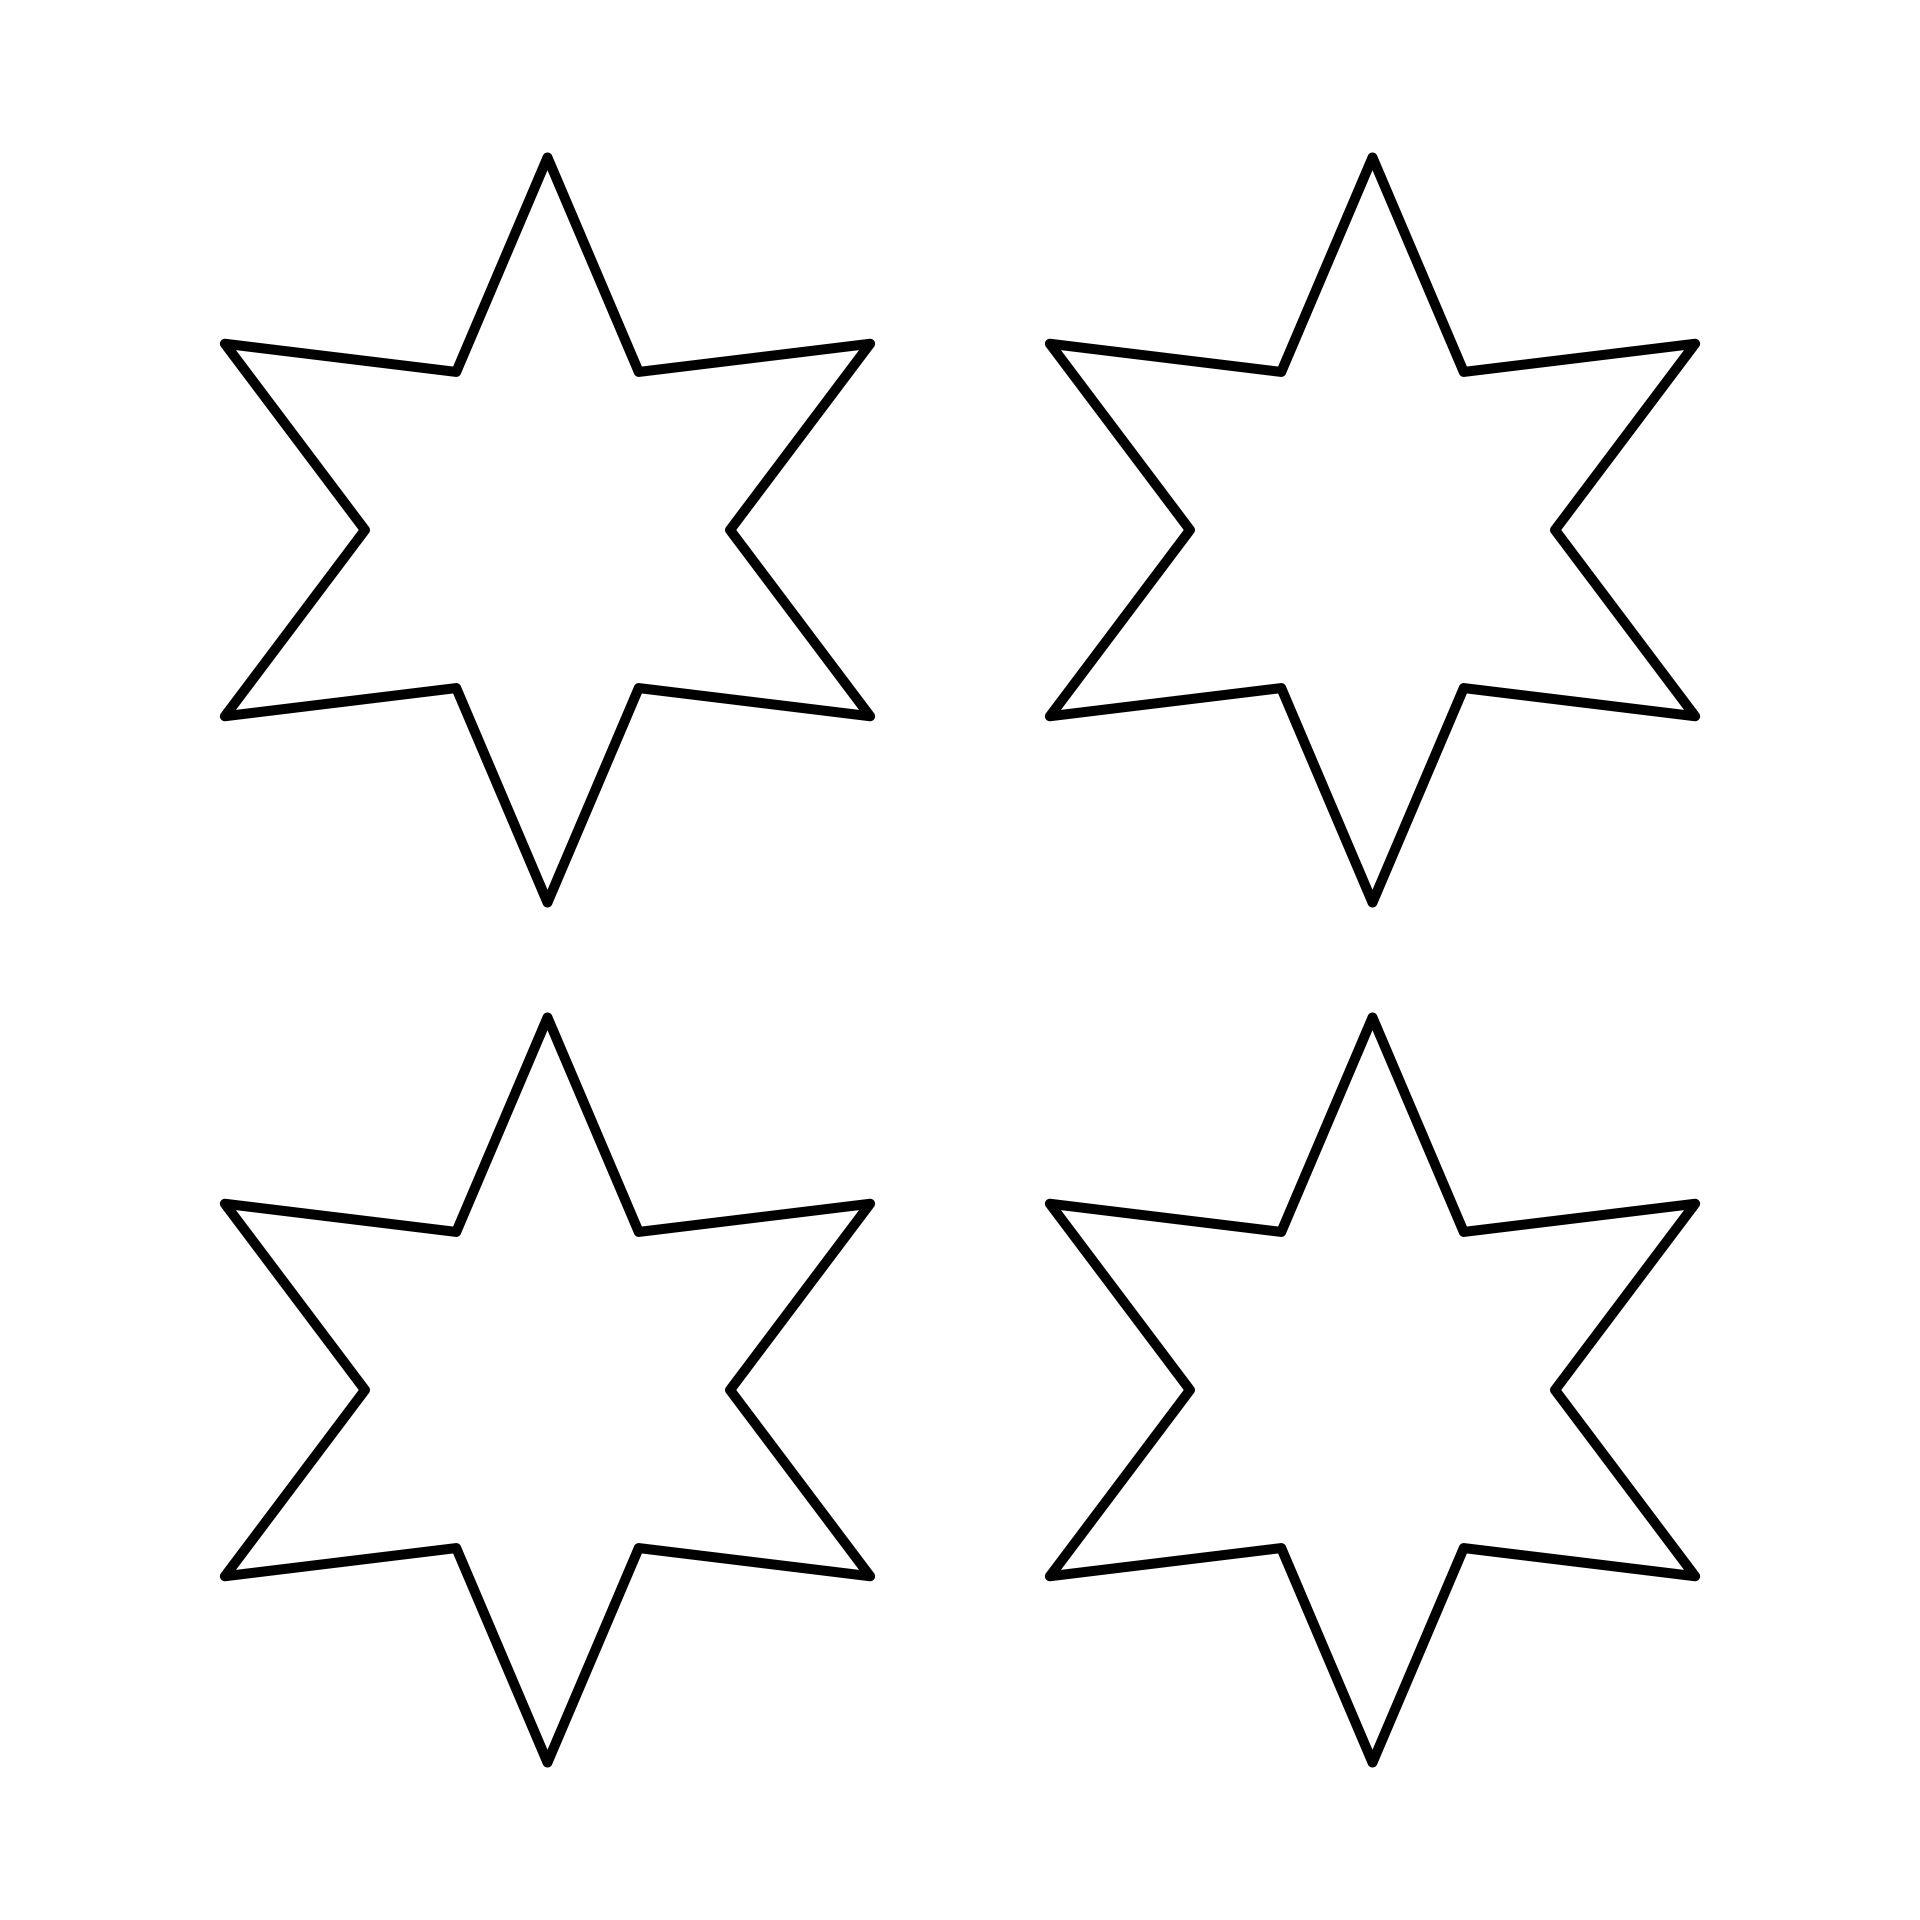 6 Best Images of Printable Cut Out Star Shape Free Printable Star